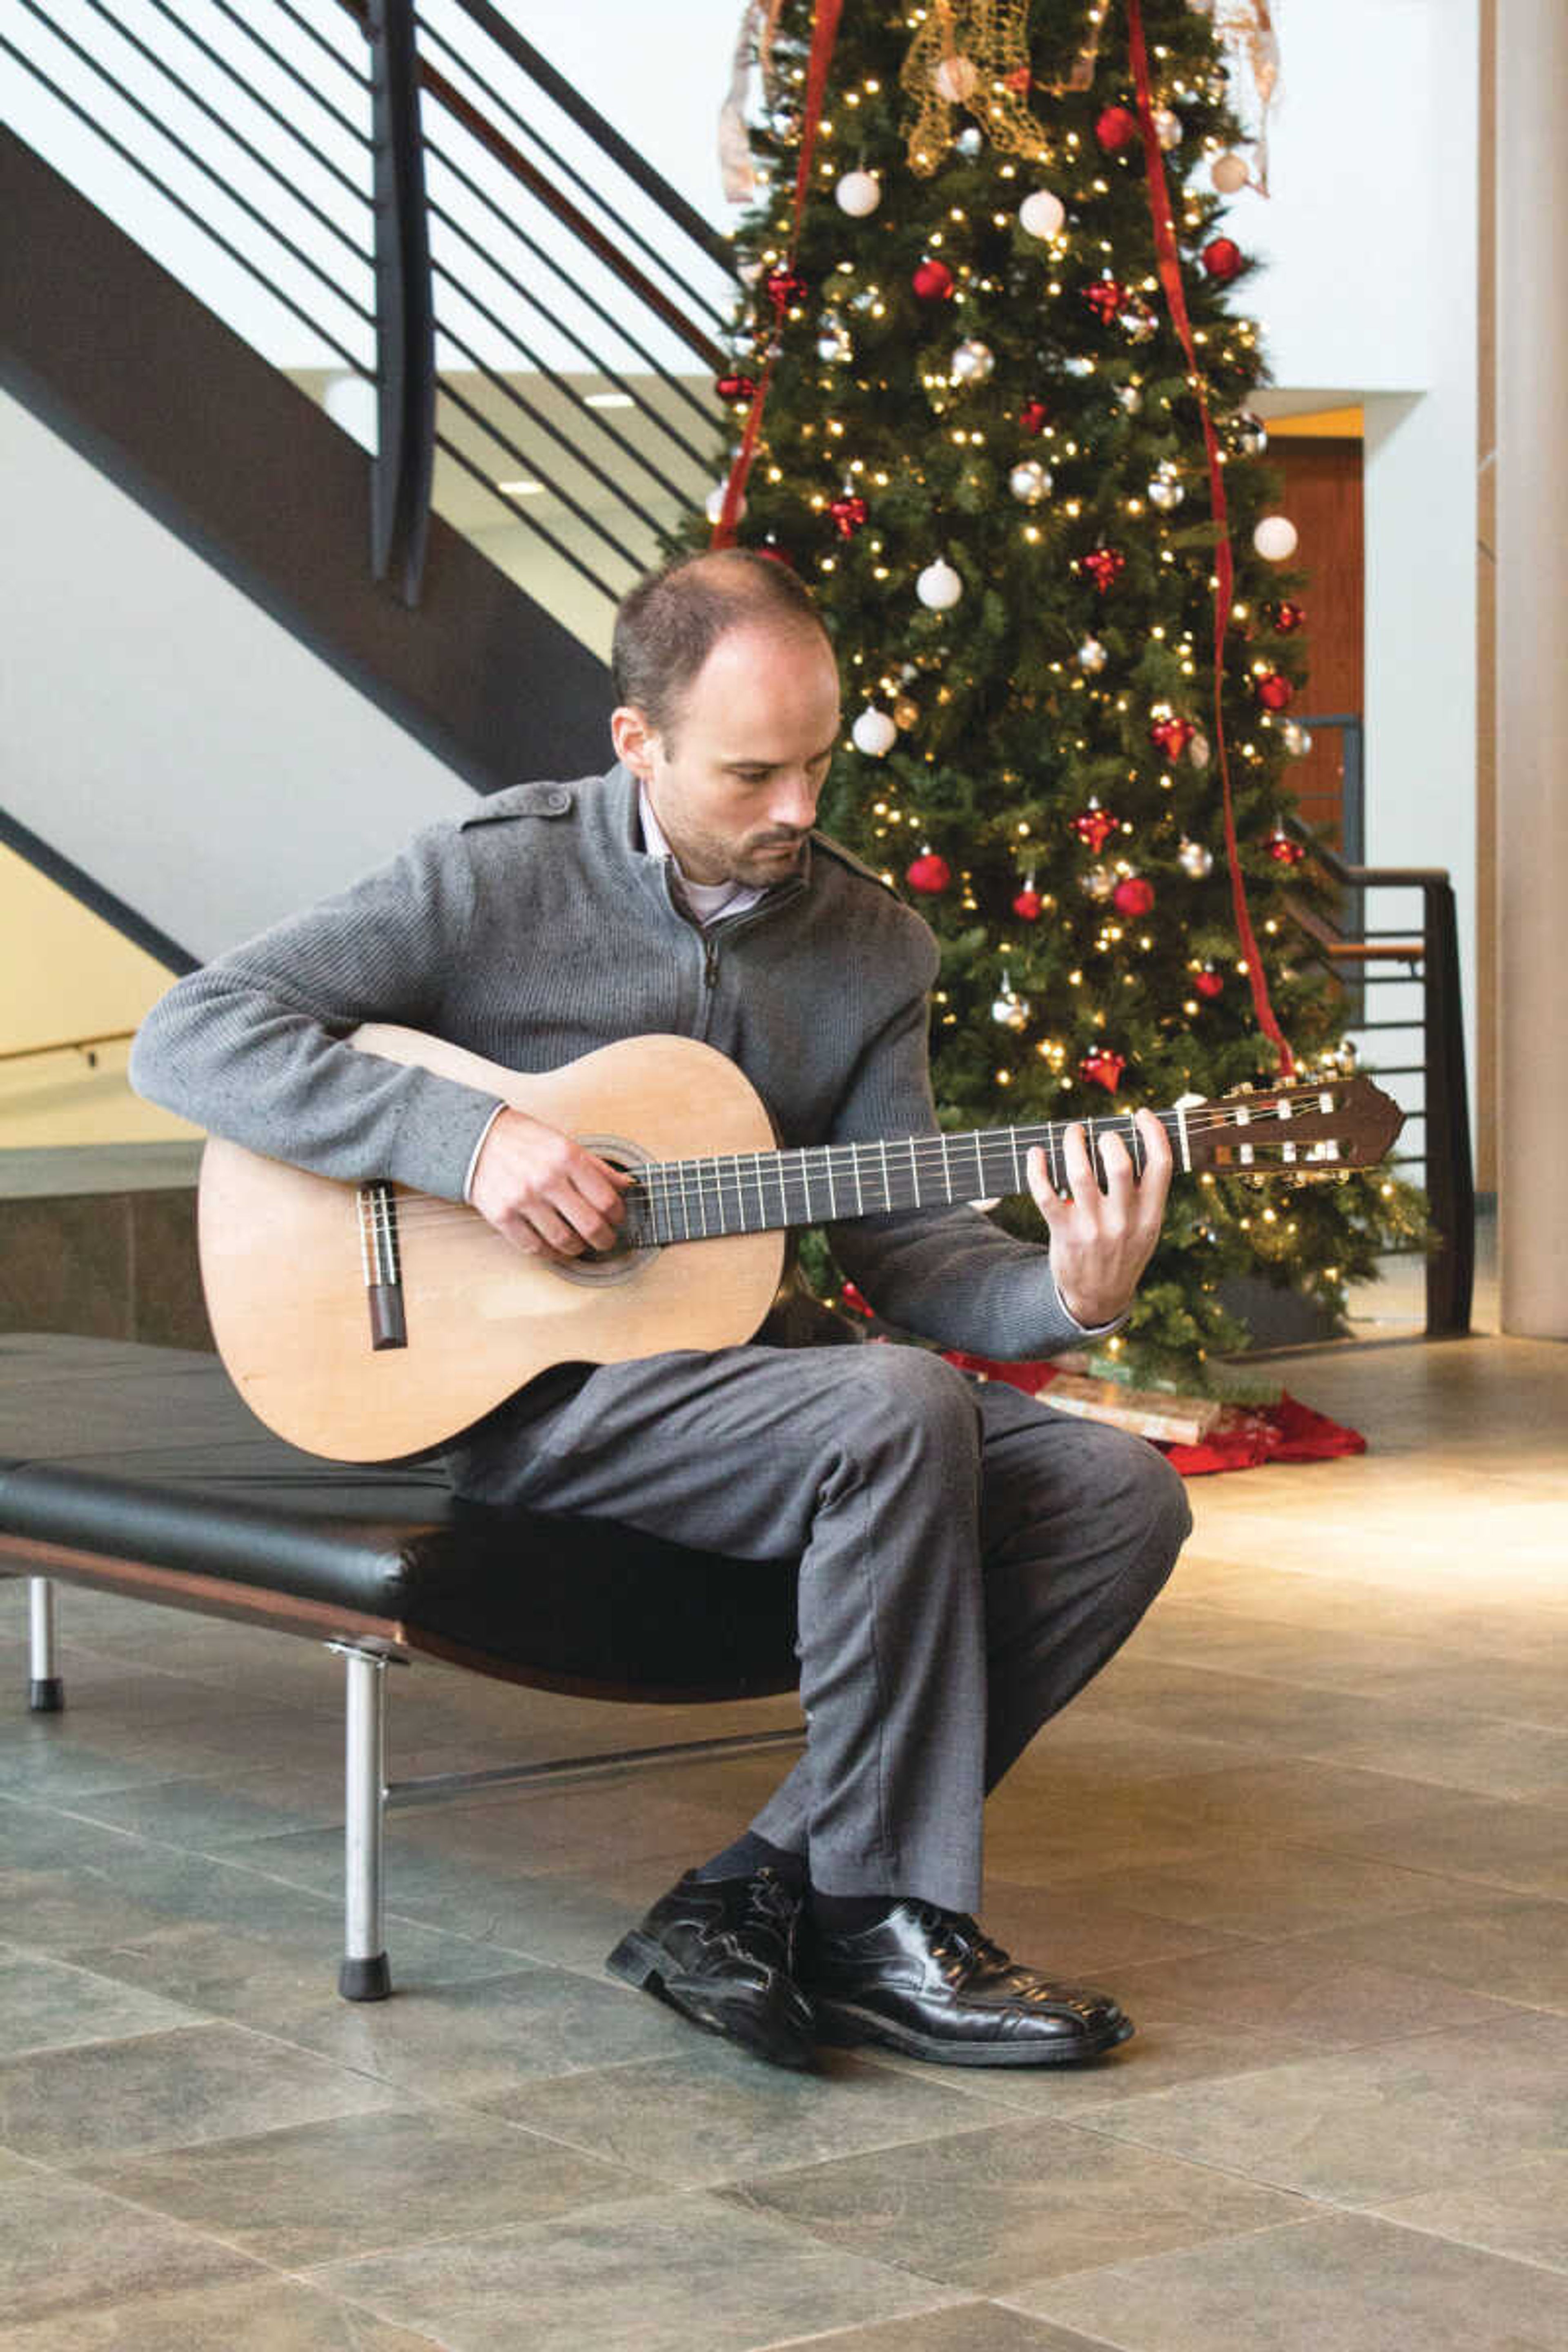 Double Fret duo to provide nostalgia to audience with holiday chamber music